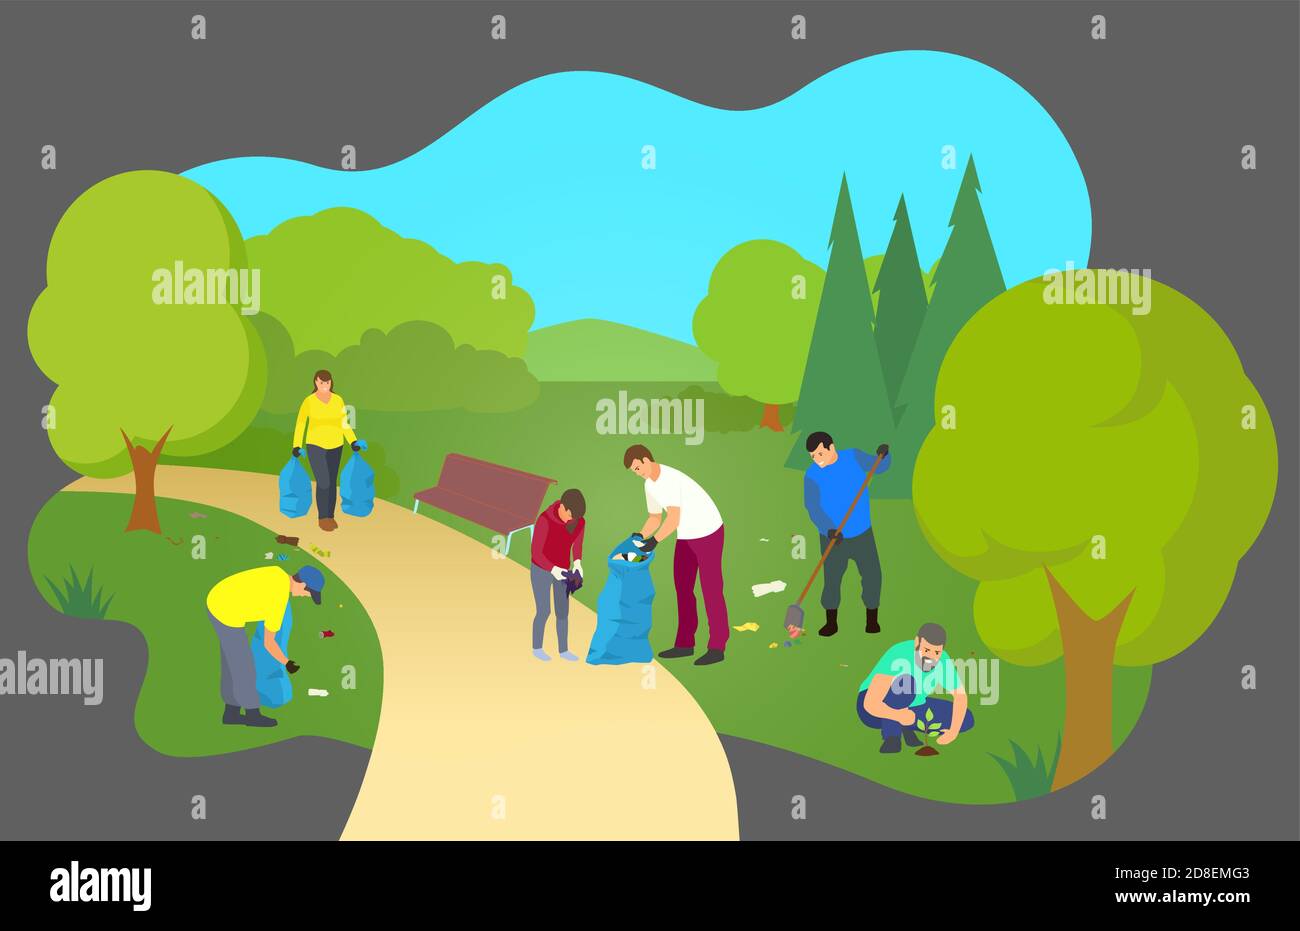 Volunteers, young and old, clean in the city Park, plant trees, collect garbage. Volunteering, charity social concept. Vector flat illustration. Ecolo Stock Vector